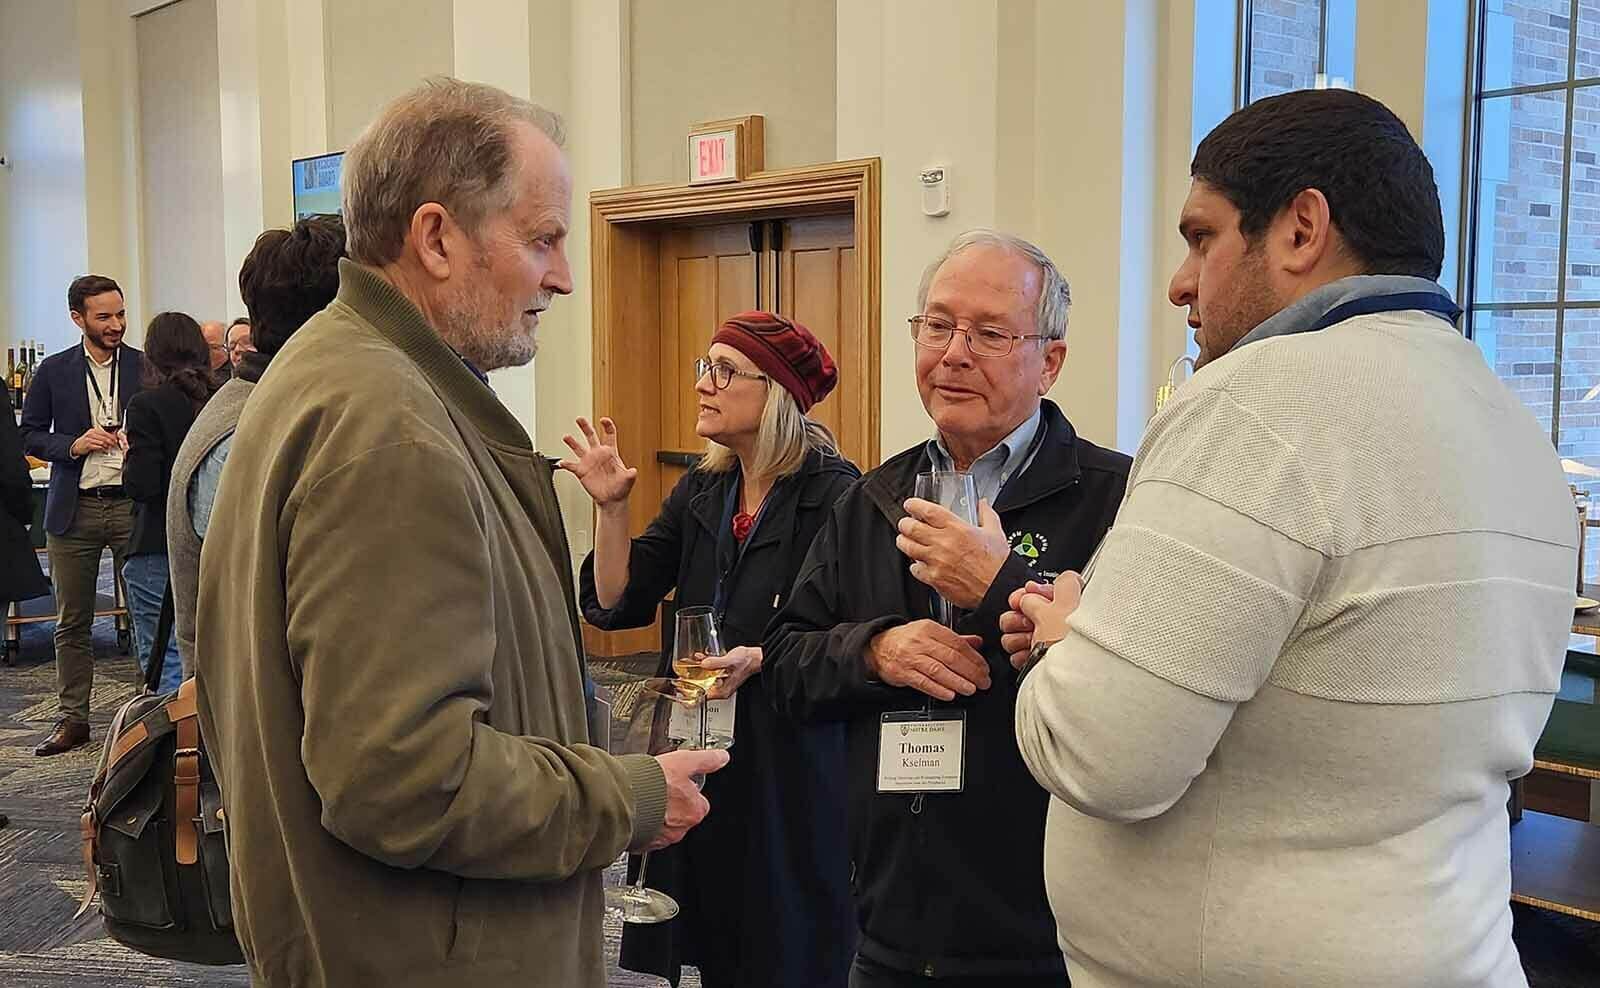 Peter Gatrell speaks with panelist Jean-Pierre Gauci and conference participant Thomas Kselman, professor emeritus in the Notre Dame department of history.